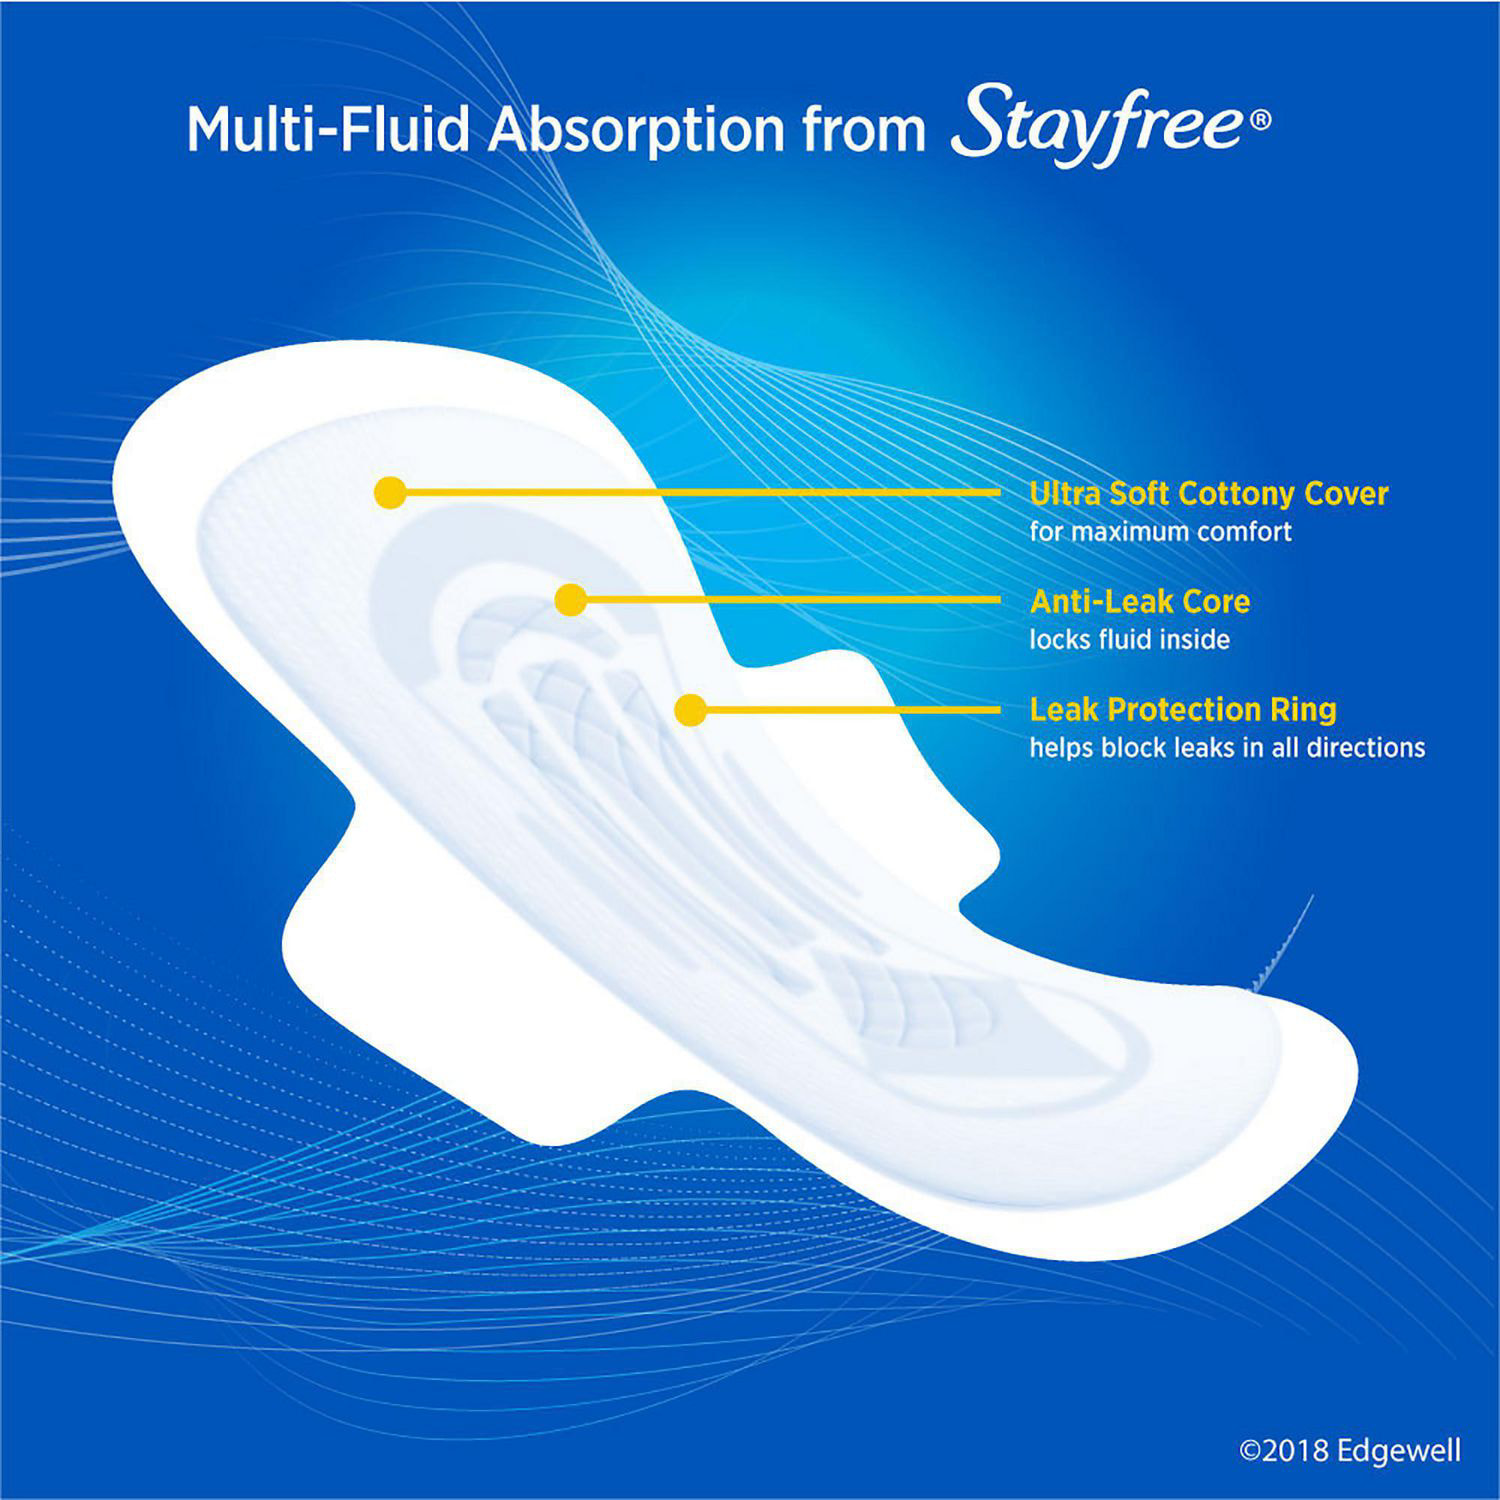 Stayfree® Ultra Thin Overnight Pads with Wings, 28 ultra thin pads 